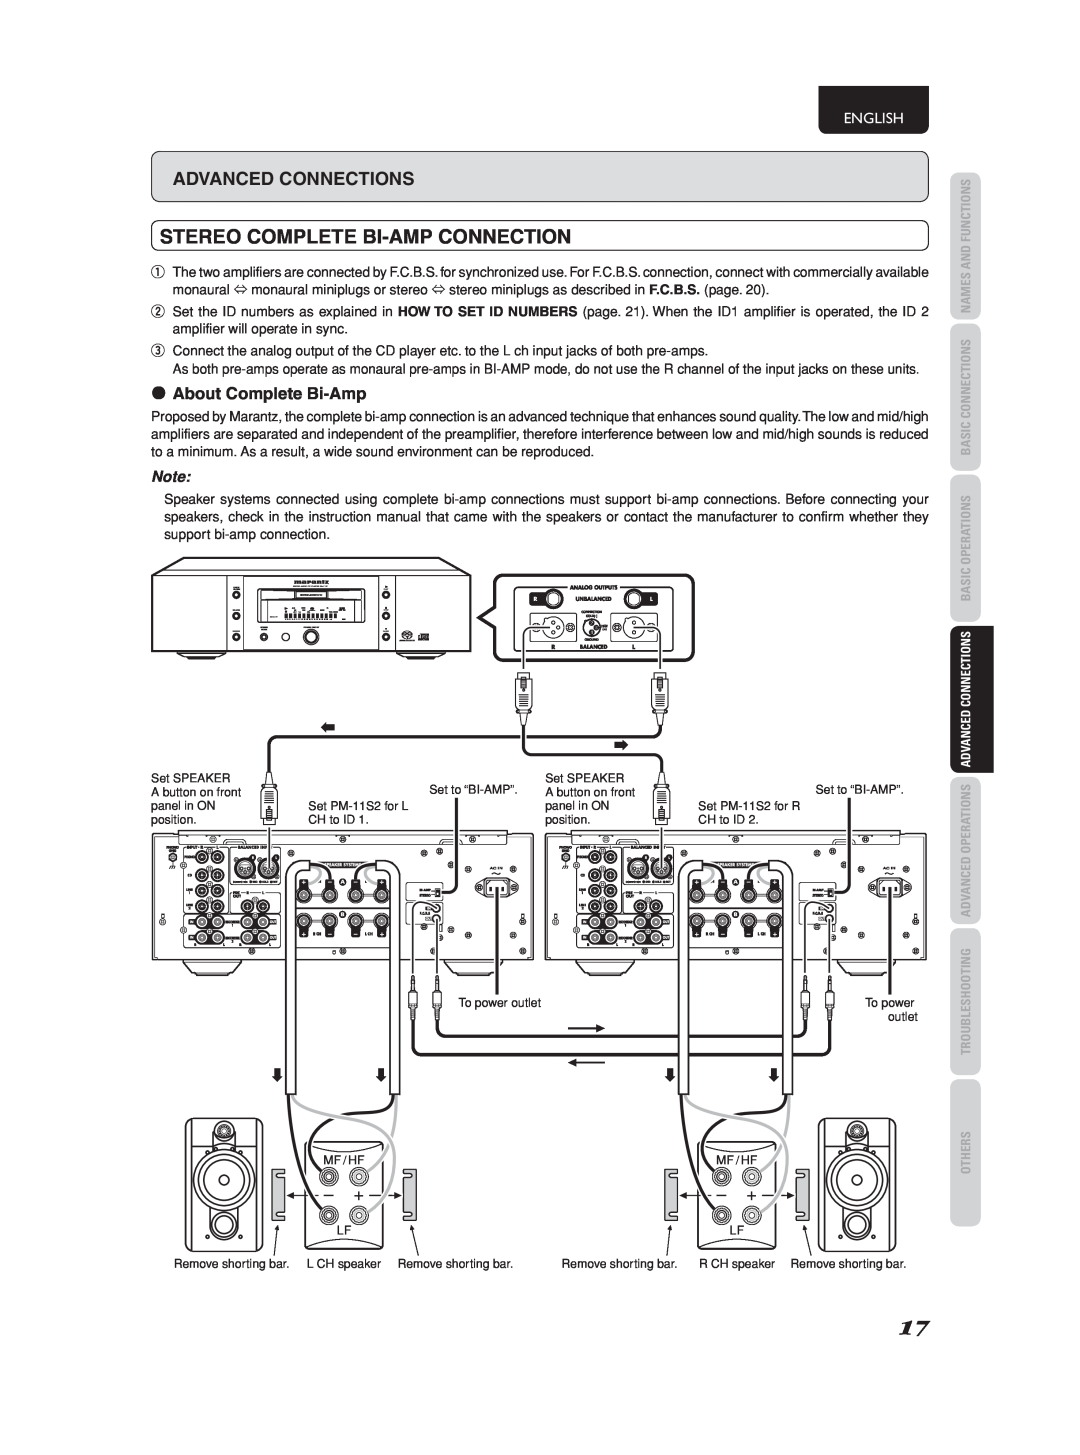 Marantz PM-11S2 manual Stereo Complete Bi-Ampconnection, ¶About Complete Bi-Amp, English 